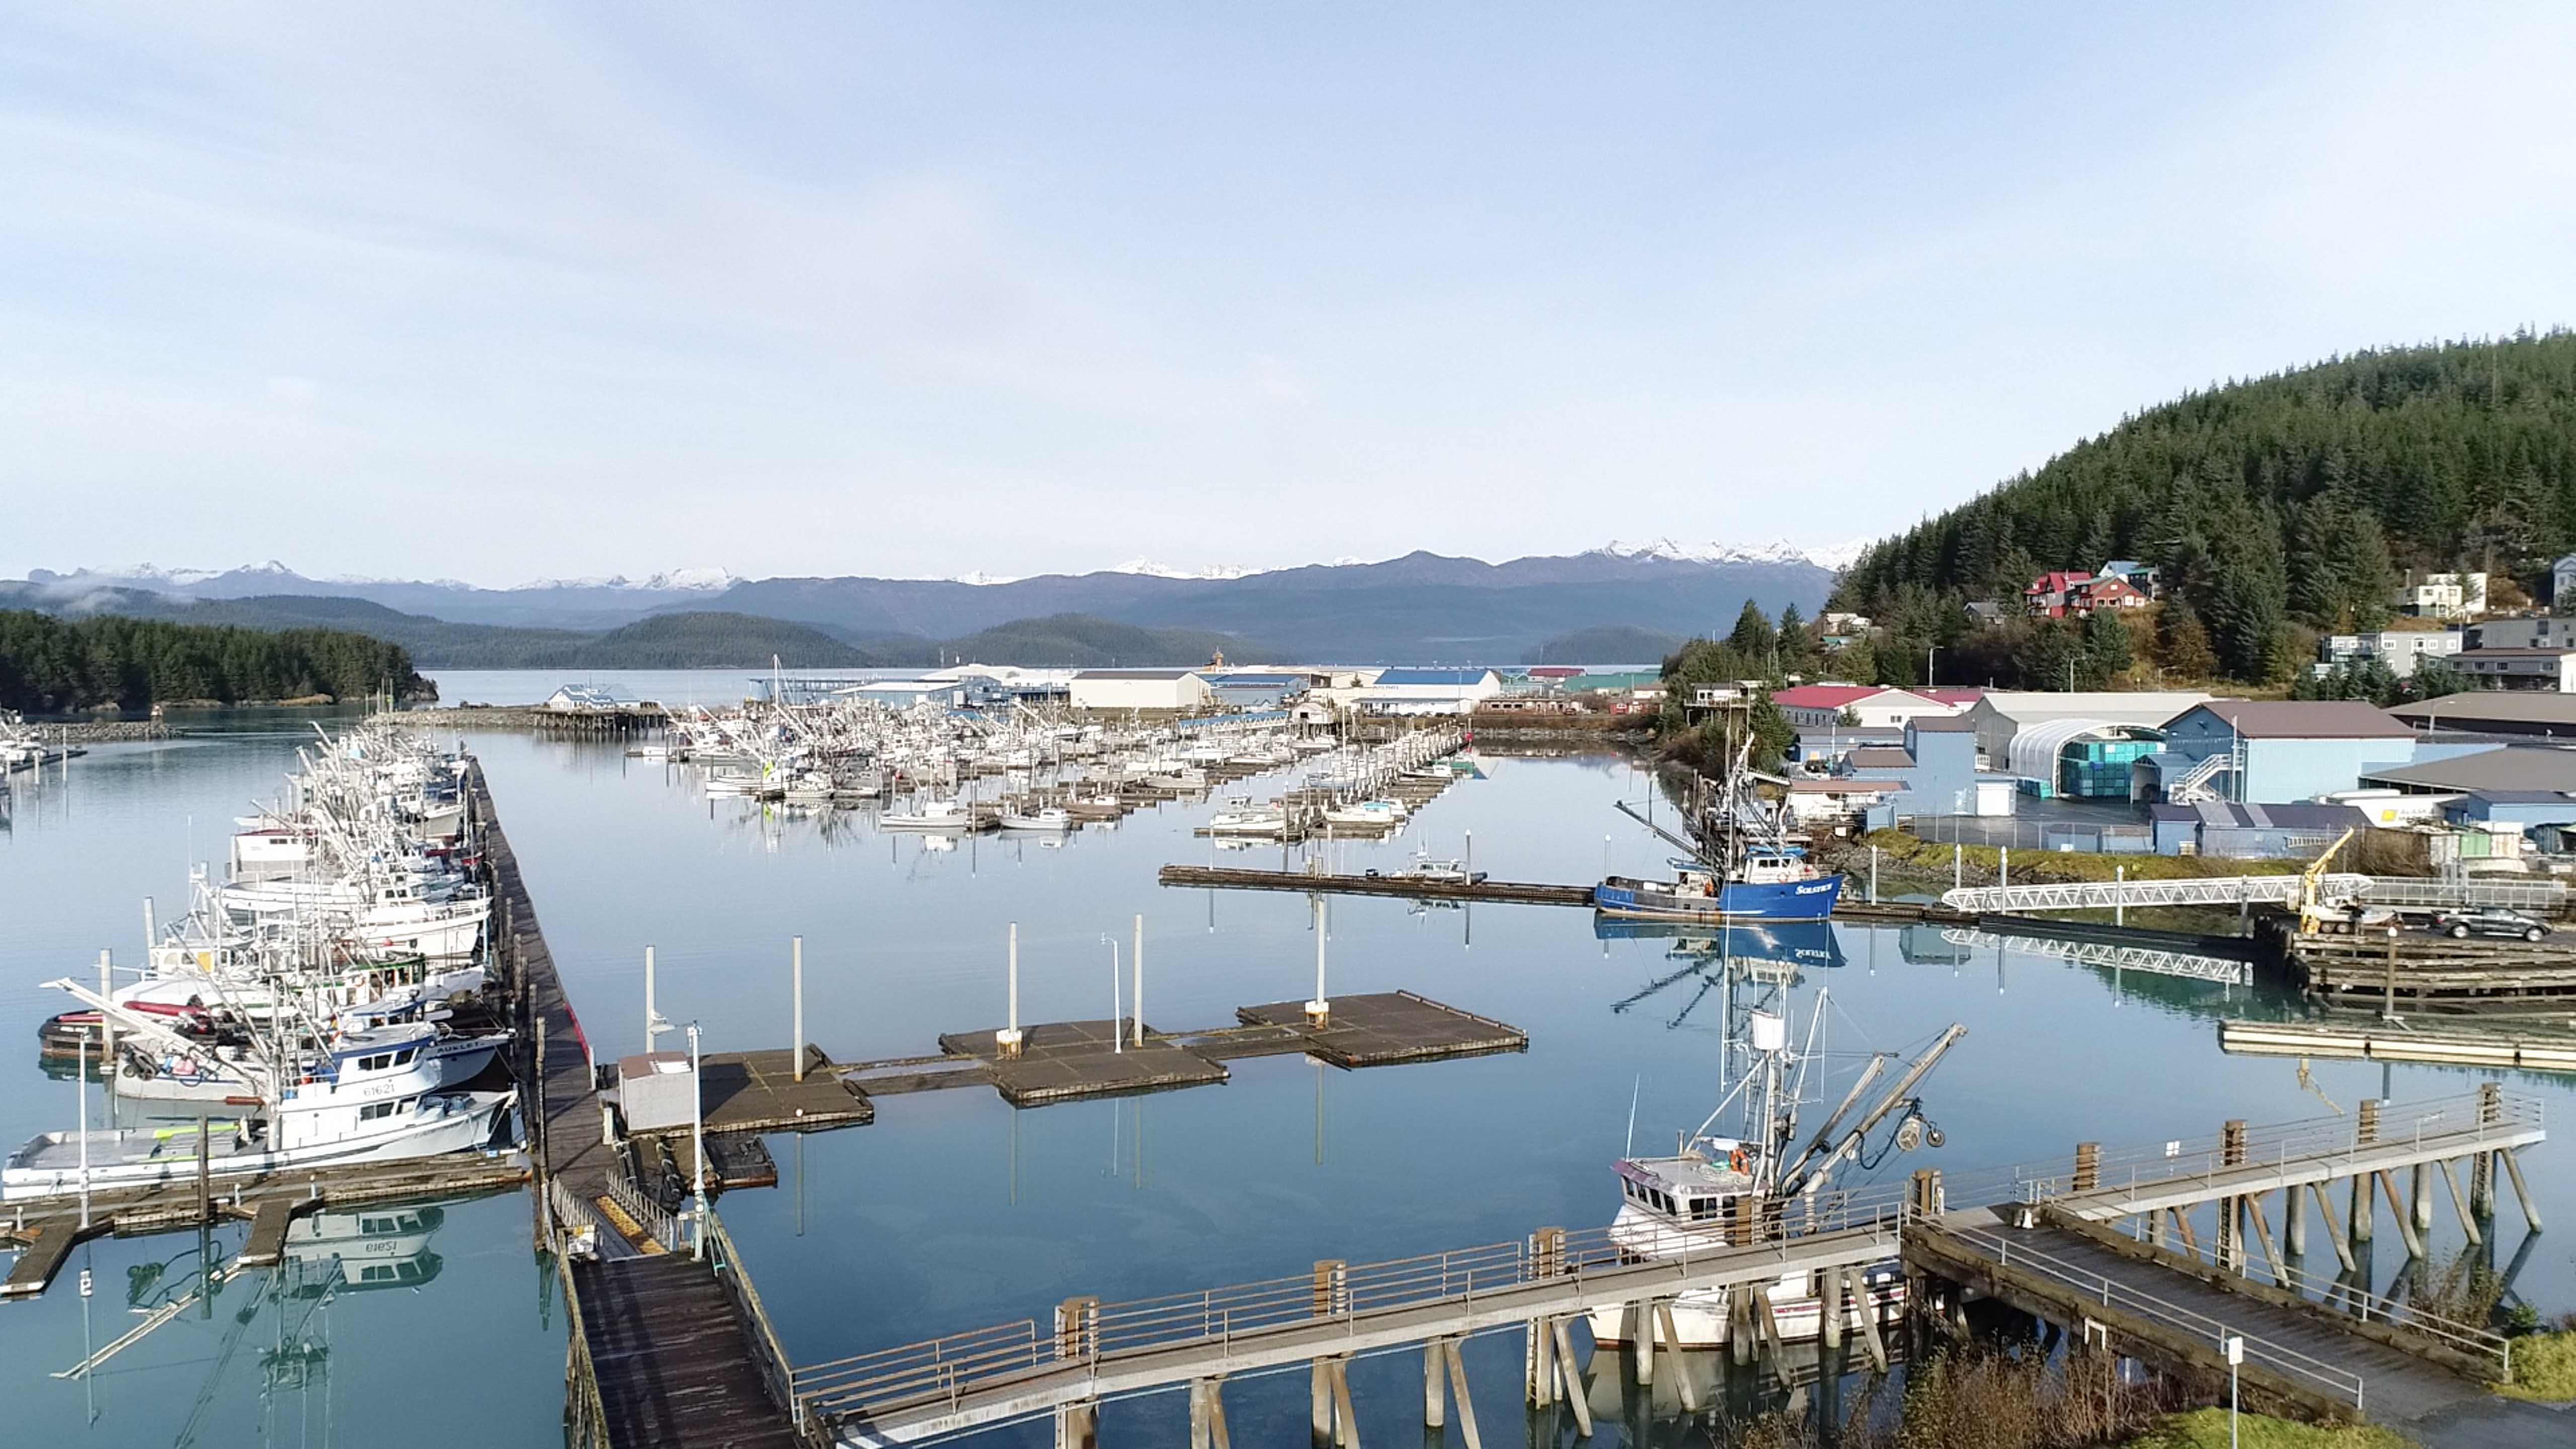 Cordova’s fishing industry is a major player in Alaska’s blue economy. Photo by Amanda Byrd.